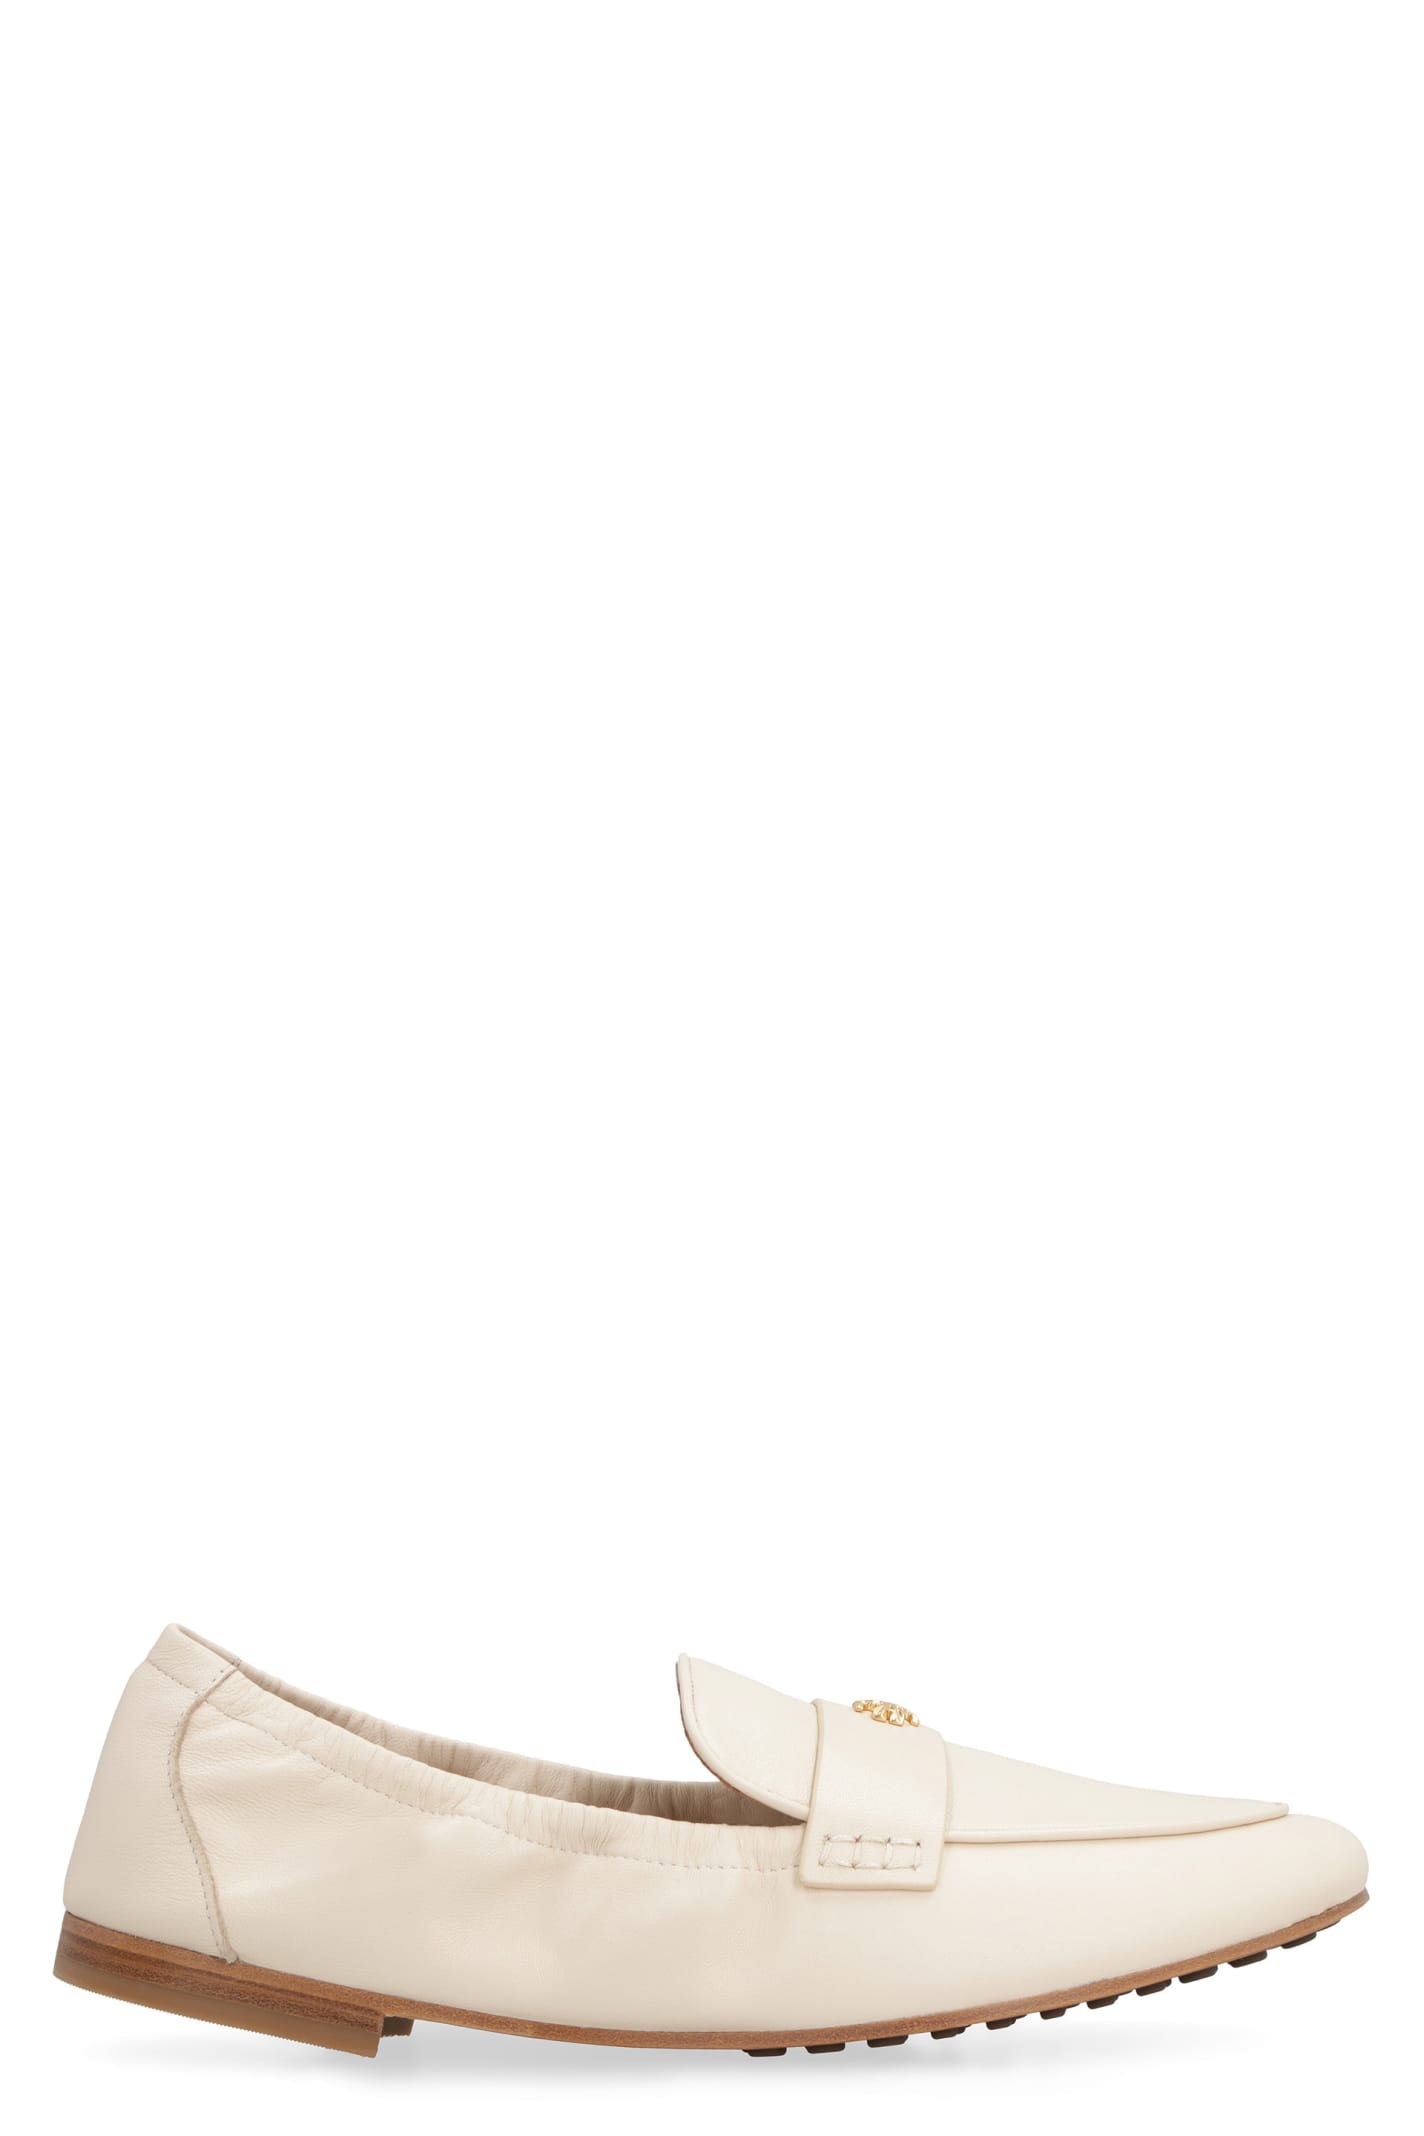 TORY BURCH LEATHER BALLET LOAFER